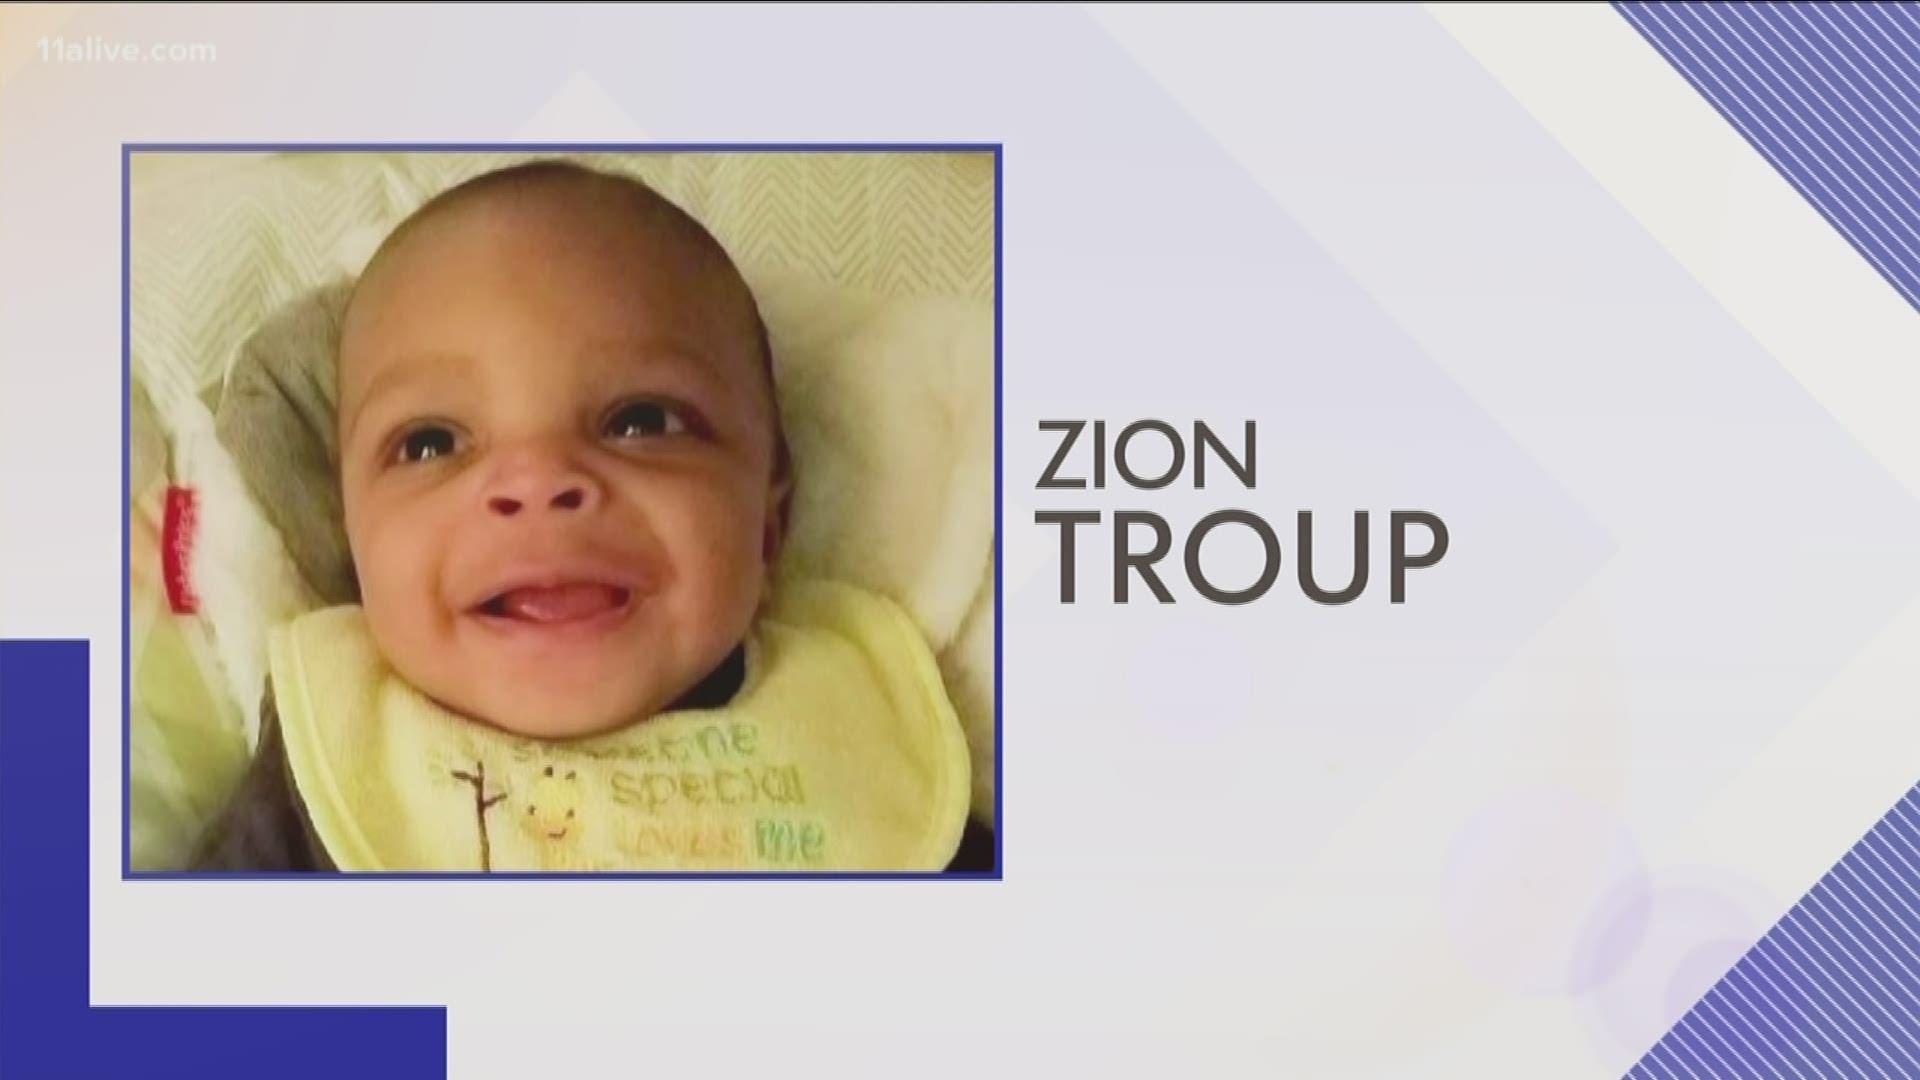 The cruelty charge stems from Troup’s heroin use while pregnant with Zion Kingston Troup.